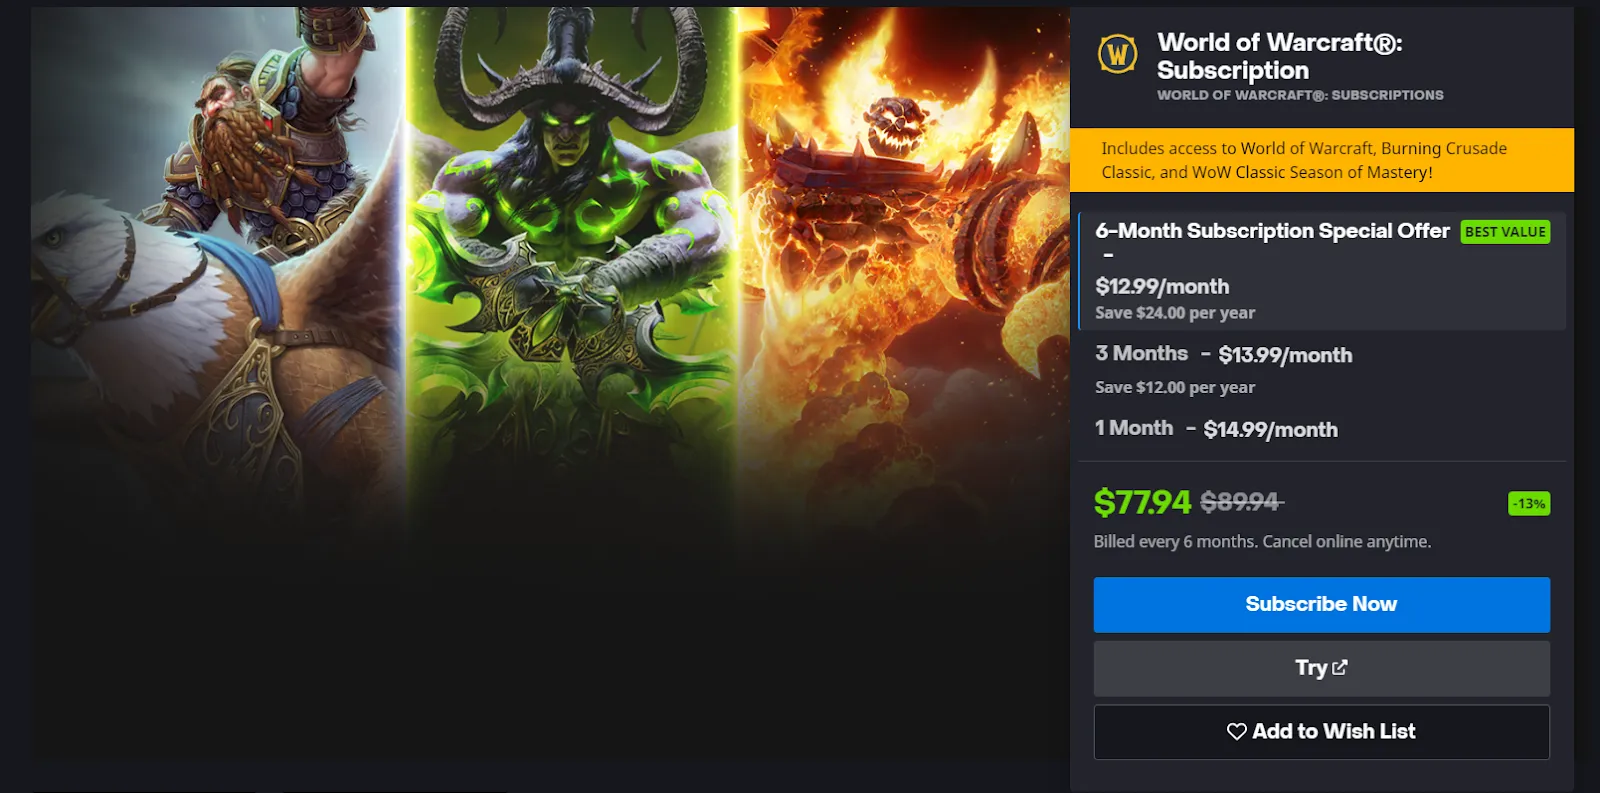 Buying subscription on Blizzard's website is not the only way to buy it.